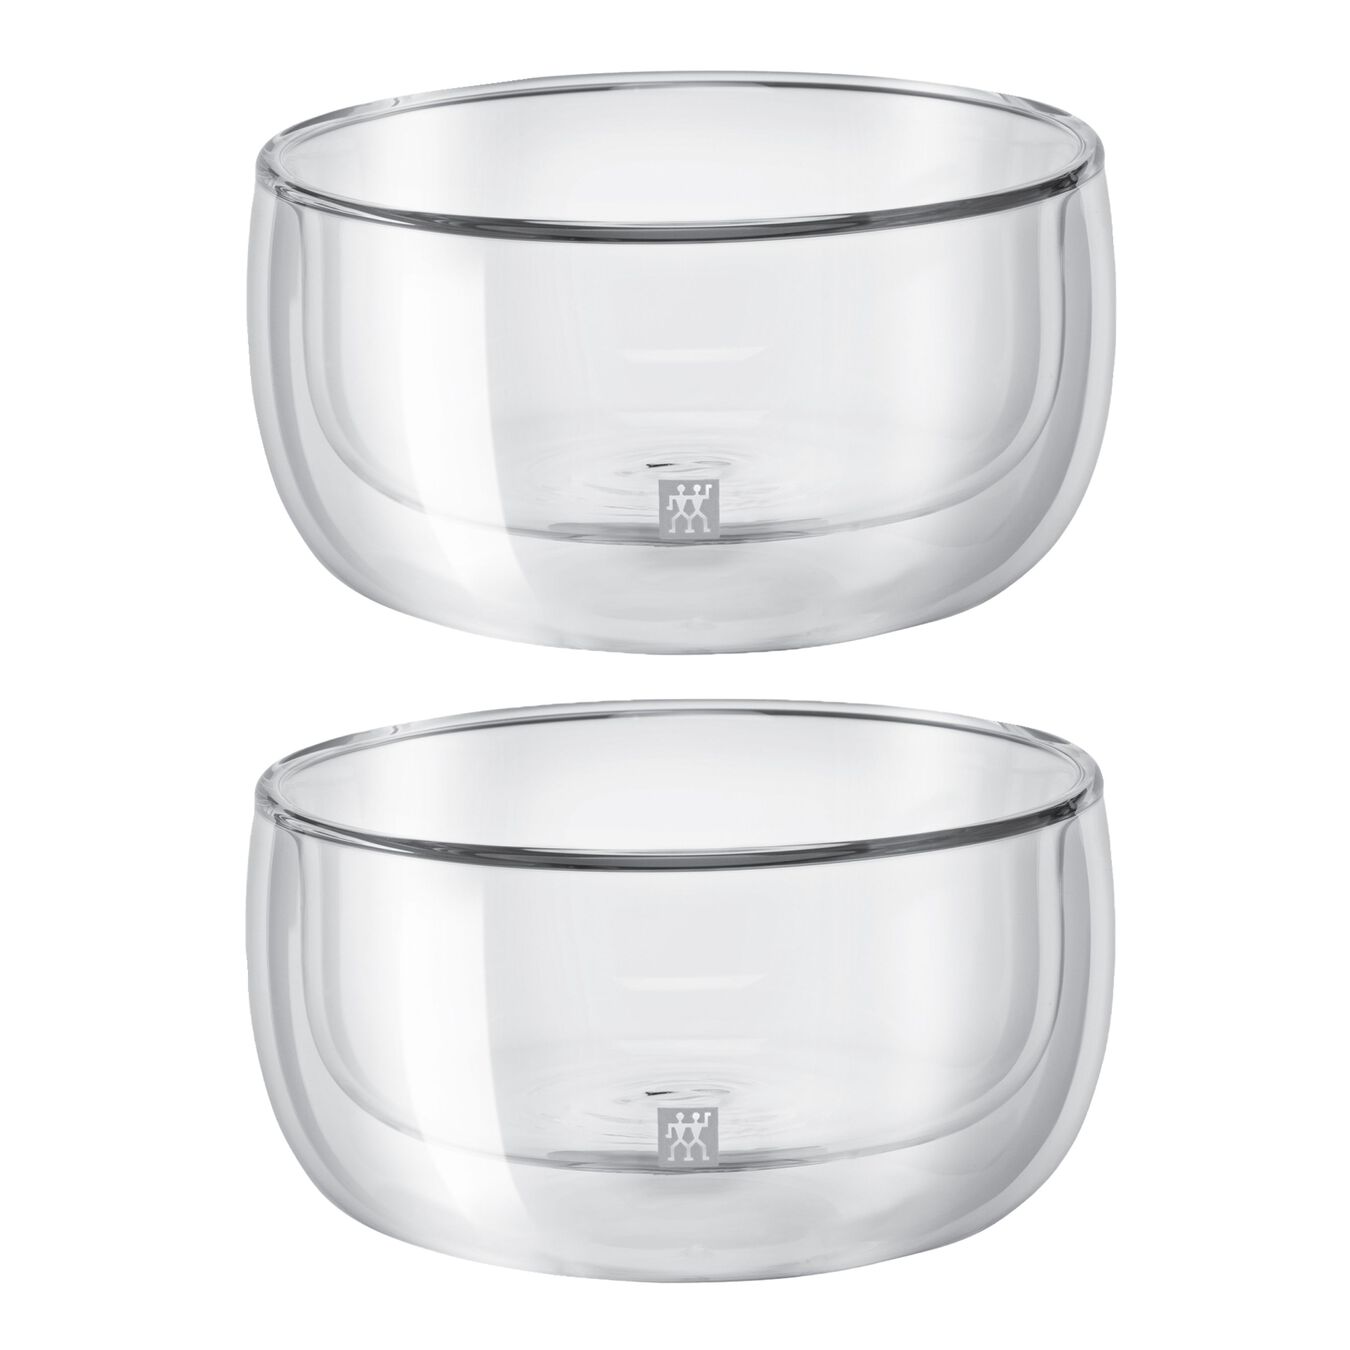 2 Piece Double-Wall Glass Bowl Set,,large 1